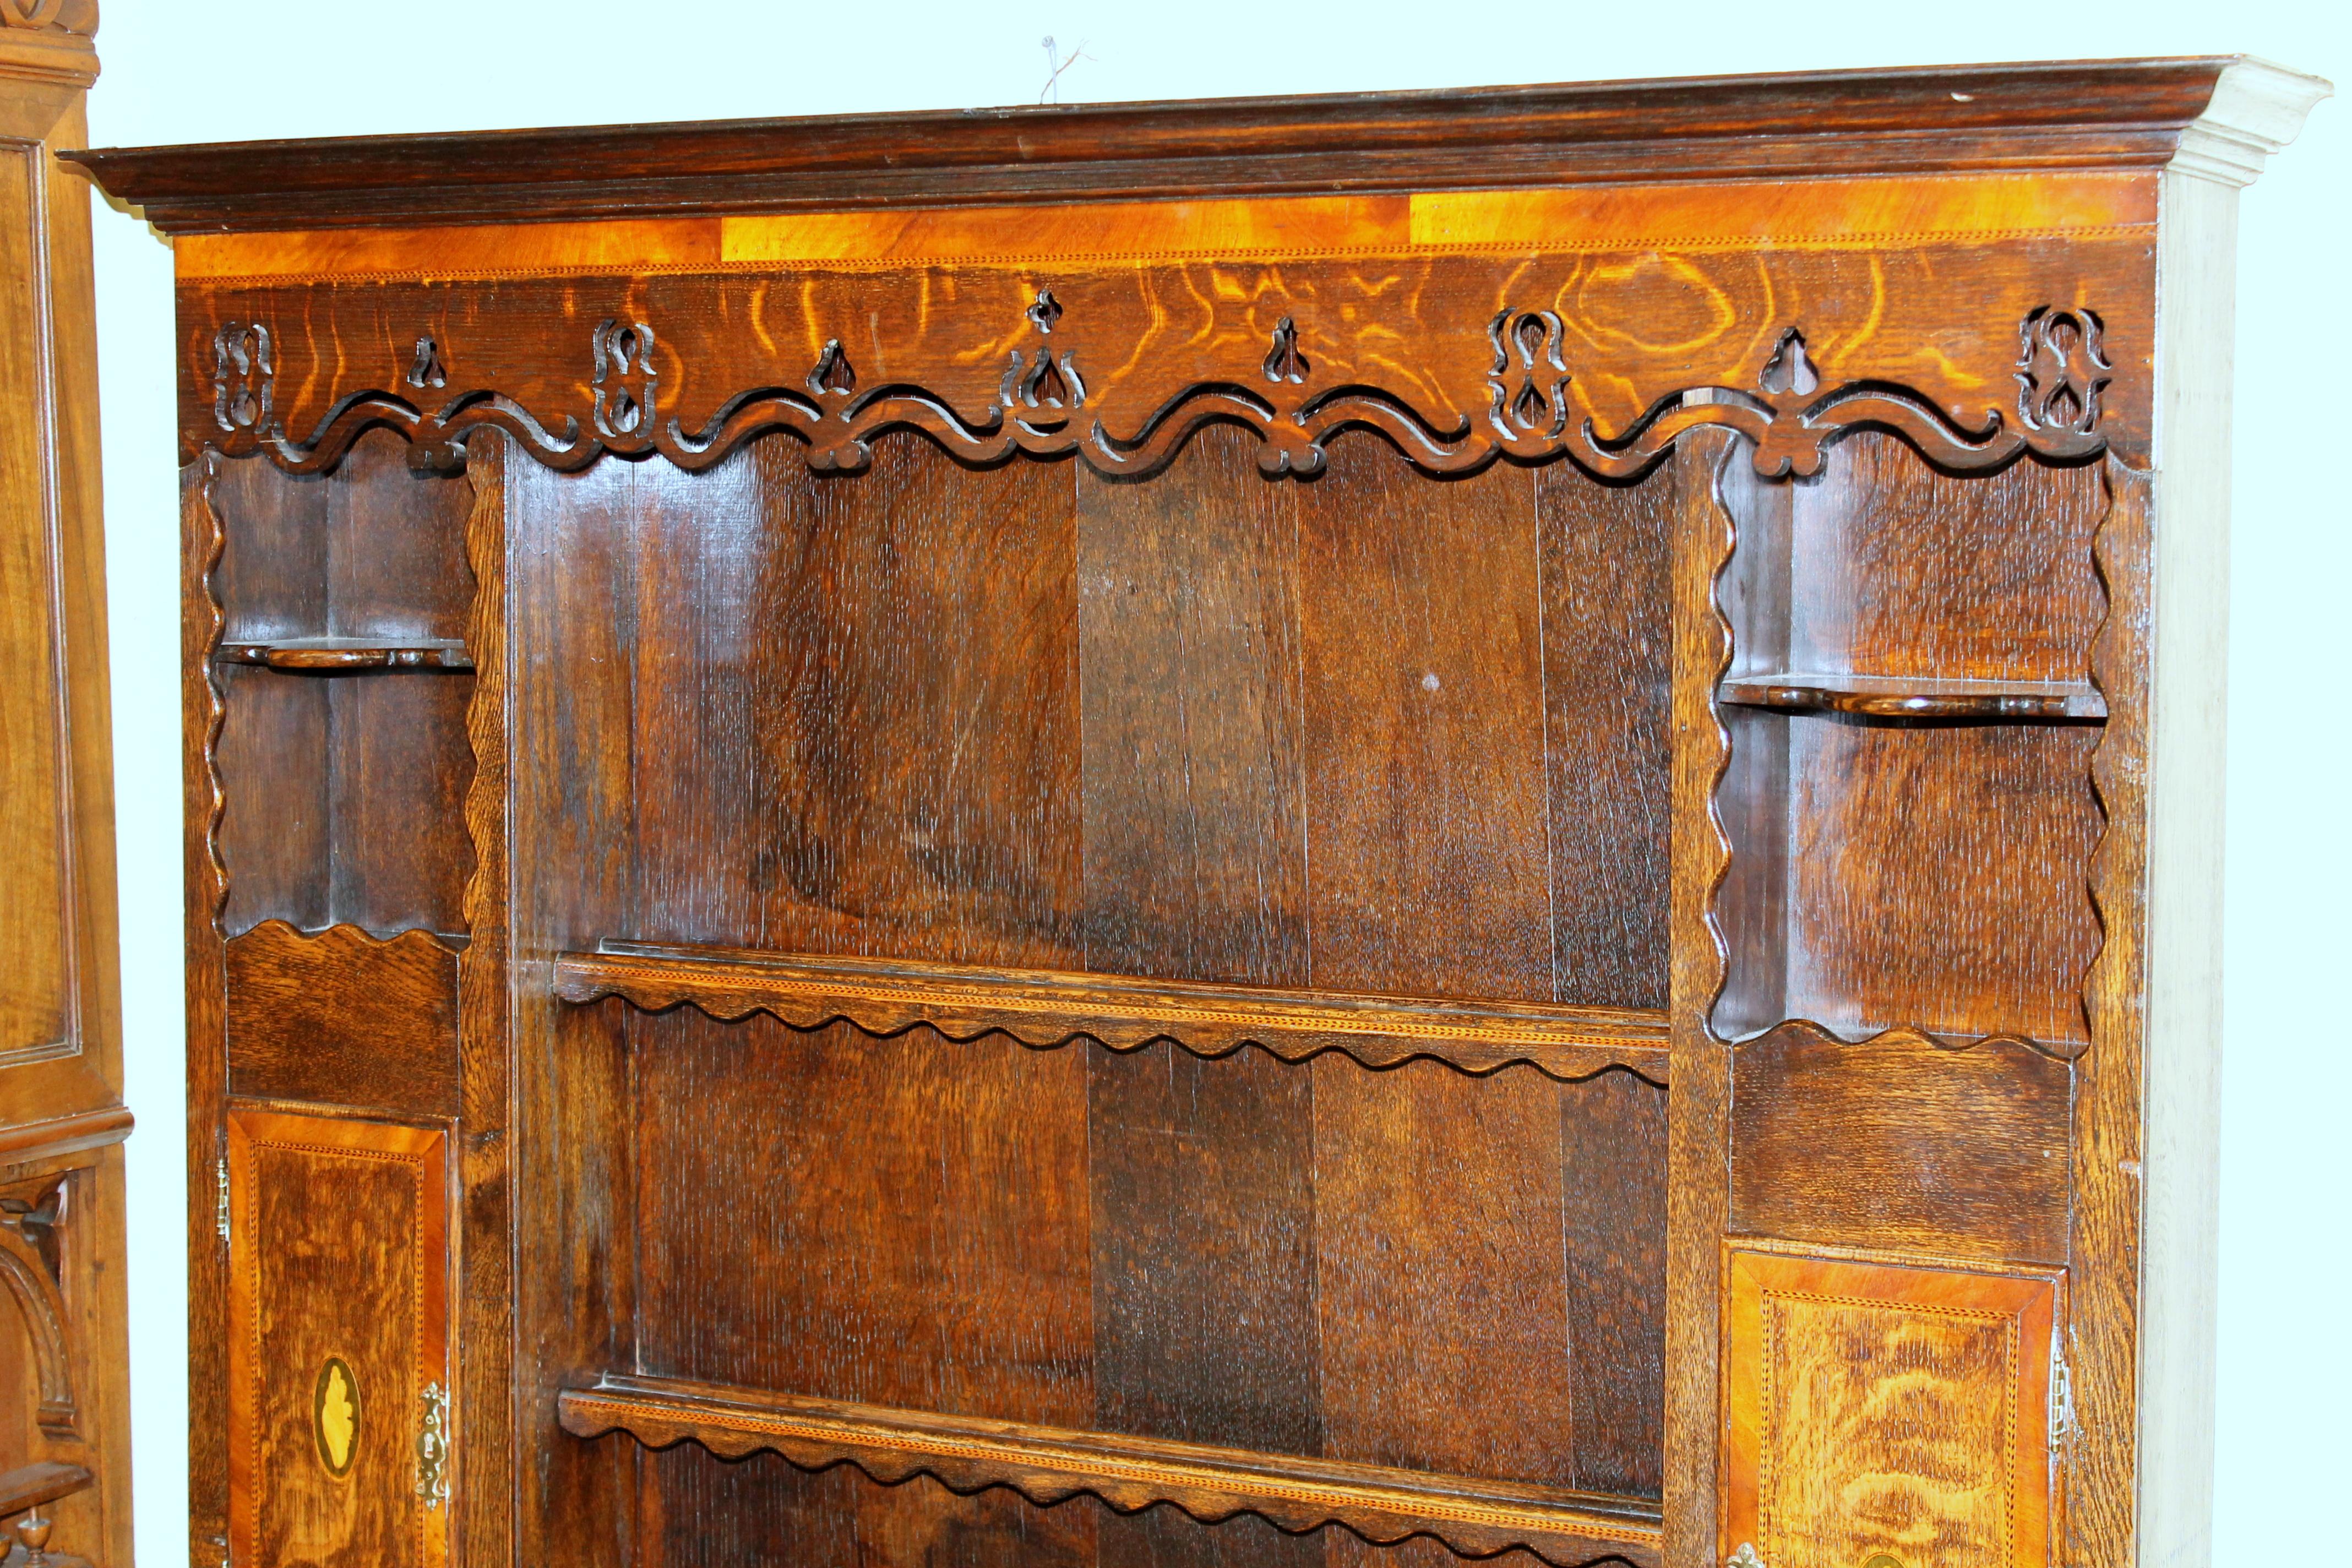 Queen Anne Antique English Lancashire Region Oak Welsh Dresser and Rack with Carved Apron